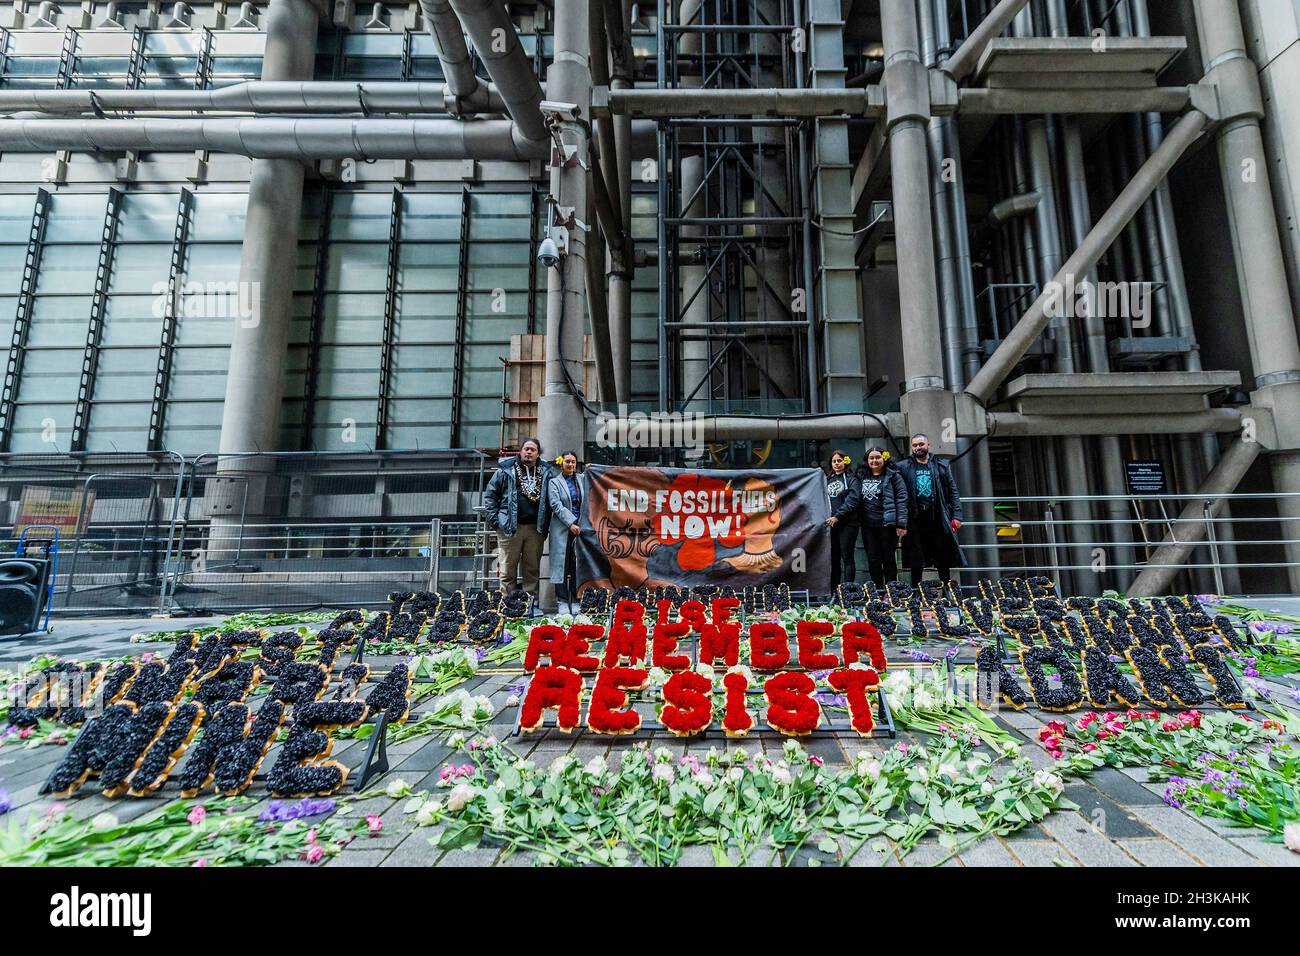 London, UK. 29 Oct 2021. Pacific Climate Warriors lay floral tributes to those in danger from climate change in their home islands - Protesters from Coal Action Network set up a climate justice memorial at Lloyd's of London to remember communities on the front lines of climate breakdown who are directly impacted by harmful projects and climate impacts. The memorial involved hundreds of flowers and floral wreaths being laid outside. Flowers with over 600 individual messages from people across the UK were handed out to staff going in and out of the Lloyd's building. Credit: Guy Bell/Alamy Live N Stock Photo